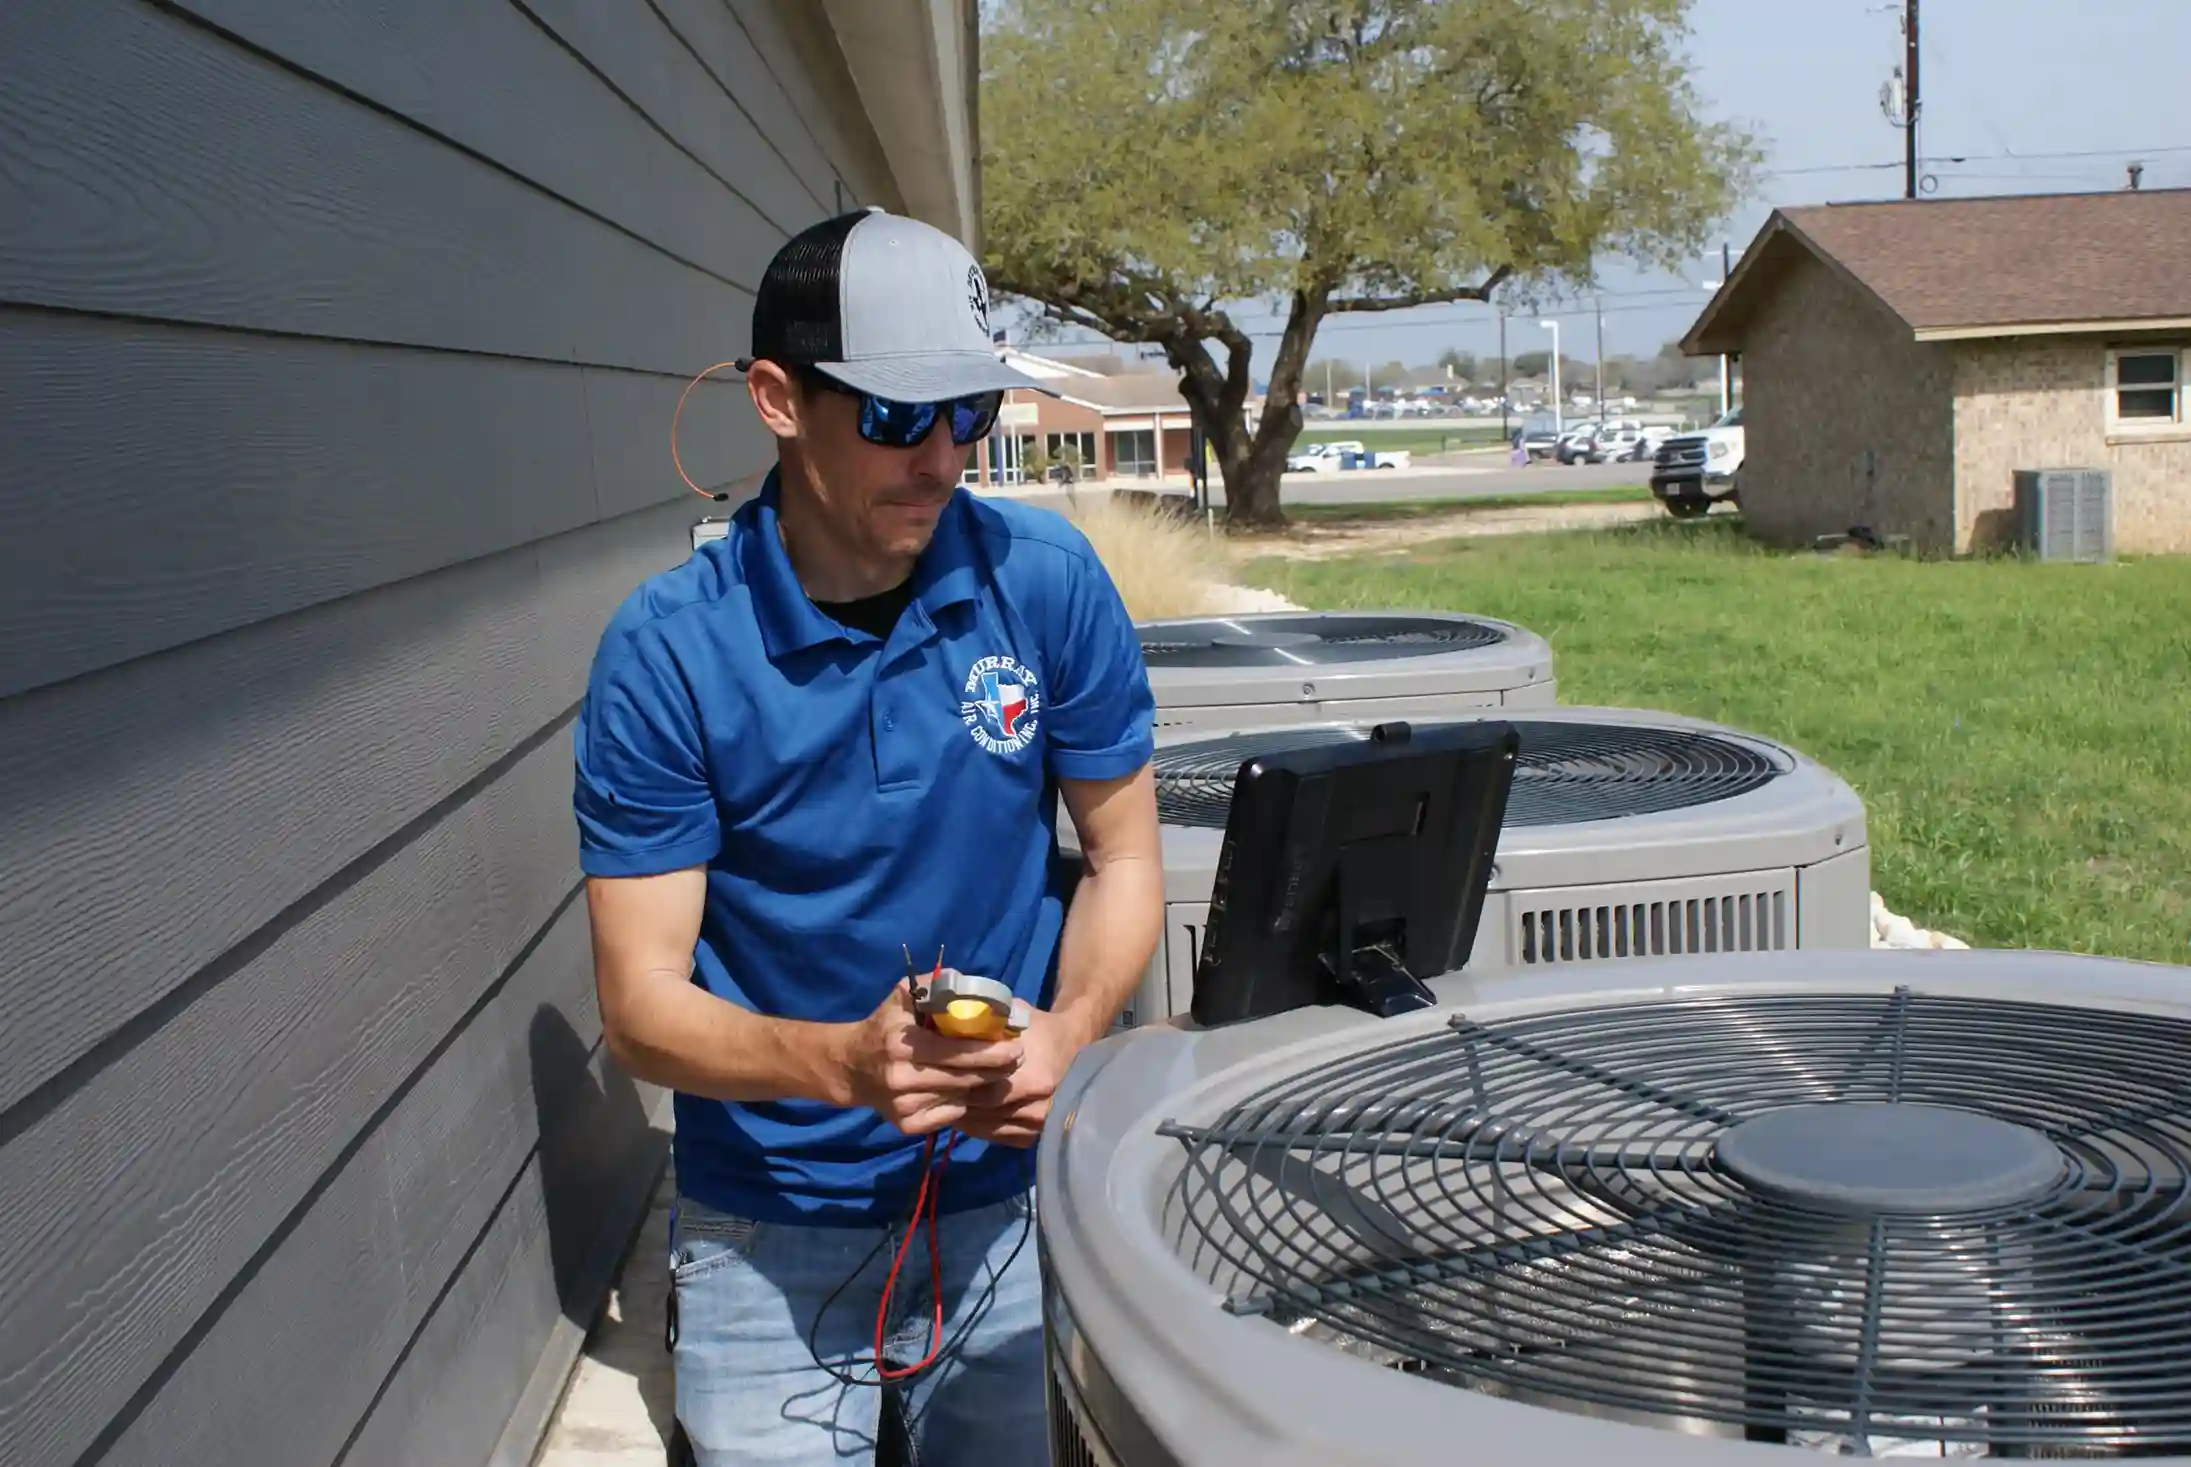 A technician in a blue polo shirt and a cap is working on an outdoor air conditioning unit.